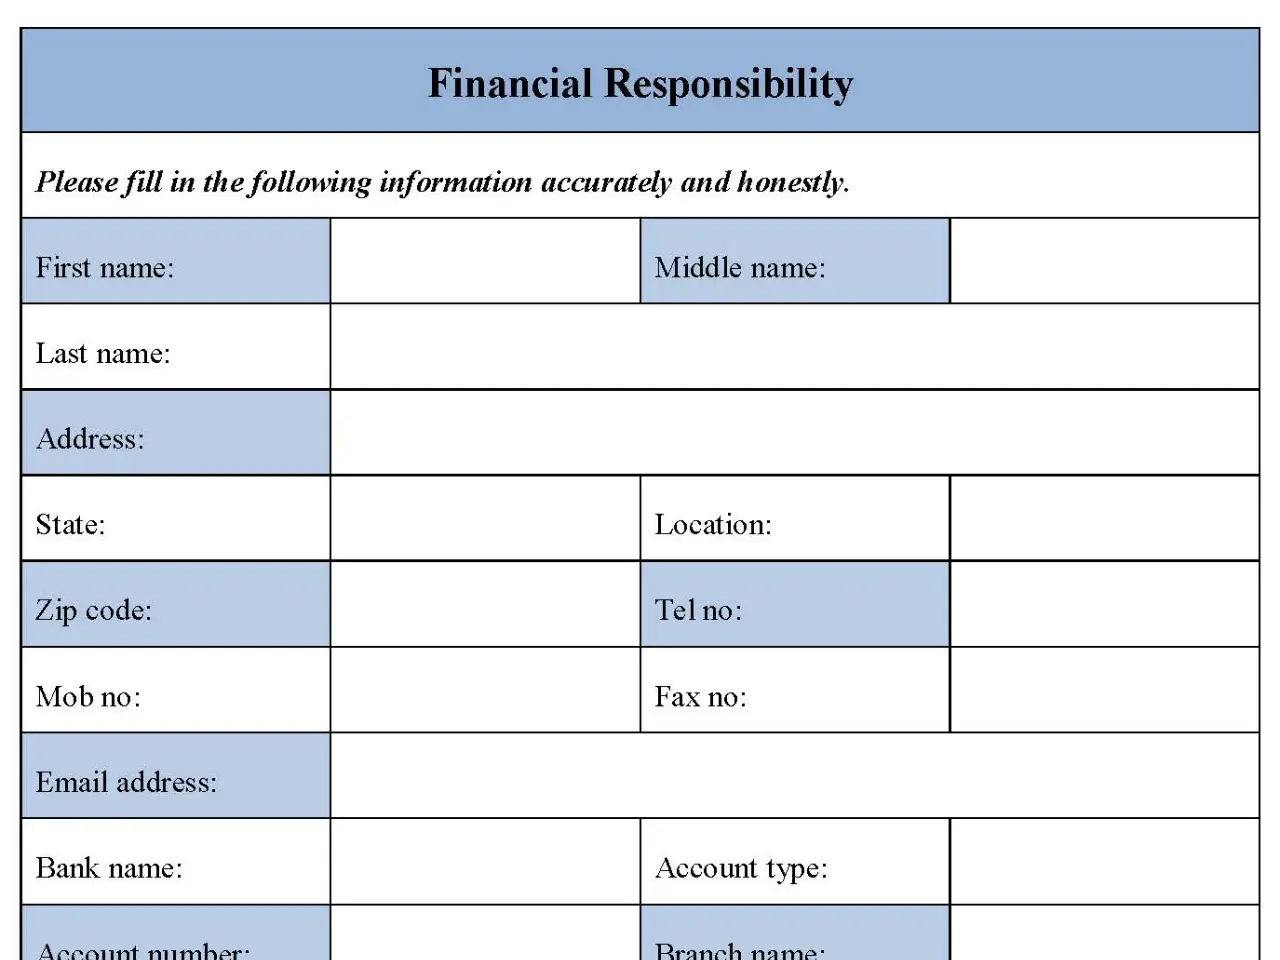 Financial Responsibility Template